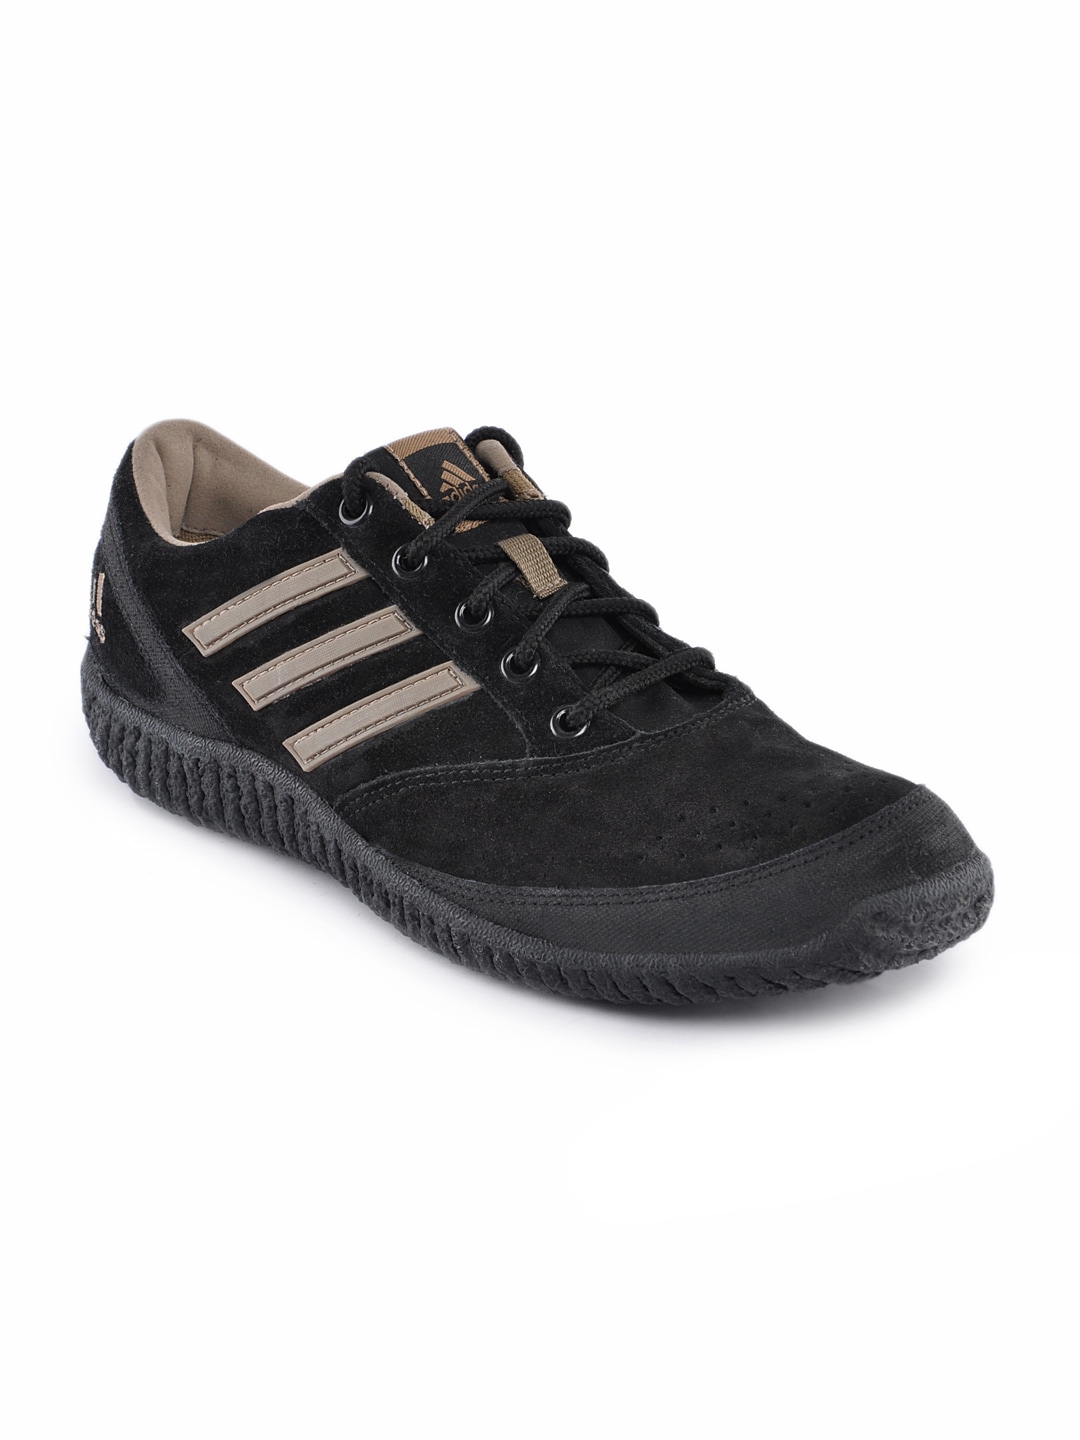 ADIDAS Men Black Outback Casual Shoes